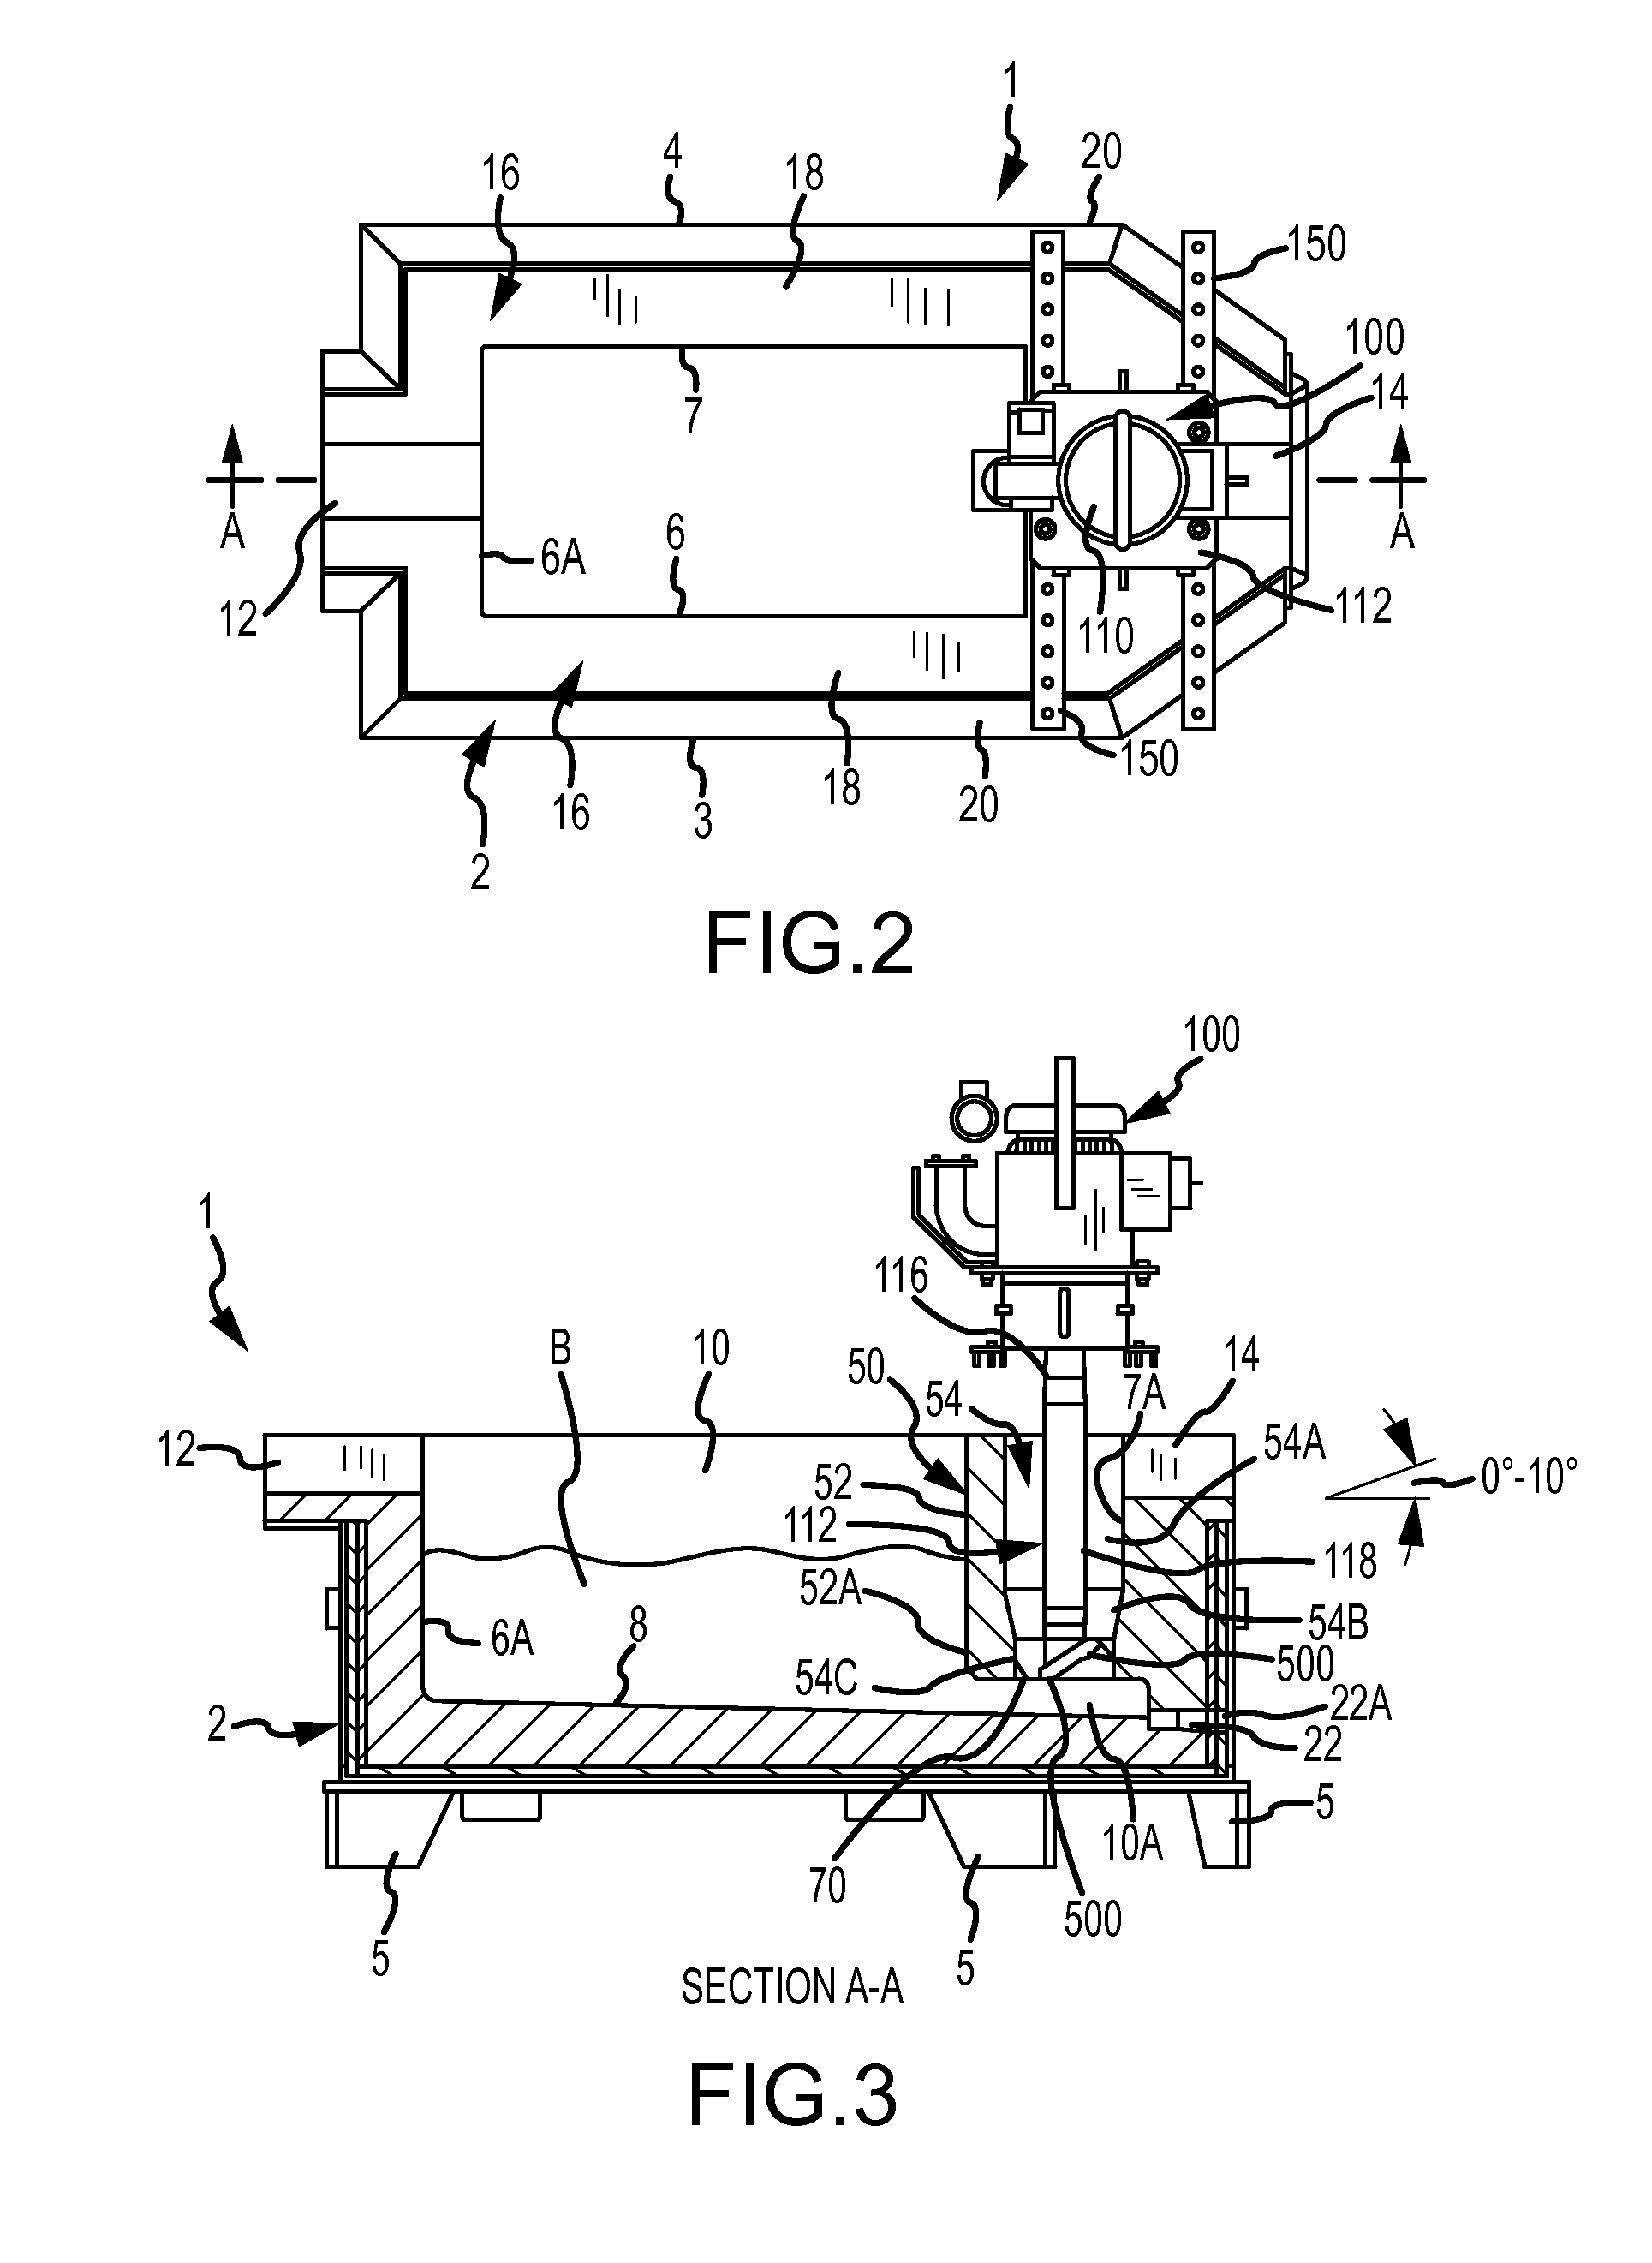 Molten metal transfer system and rotor